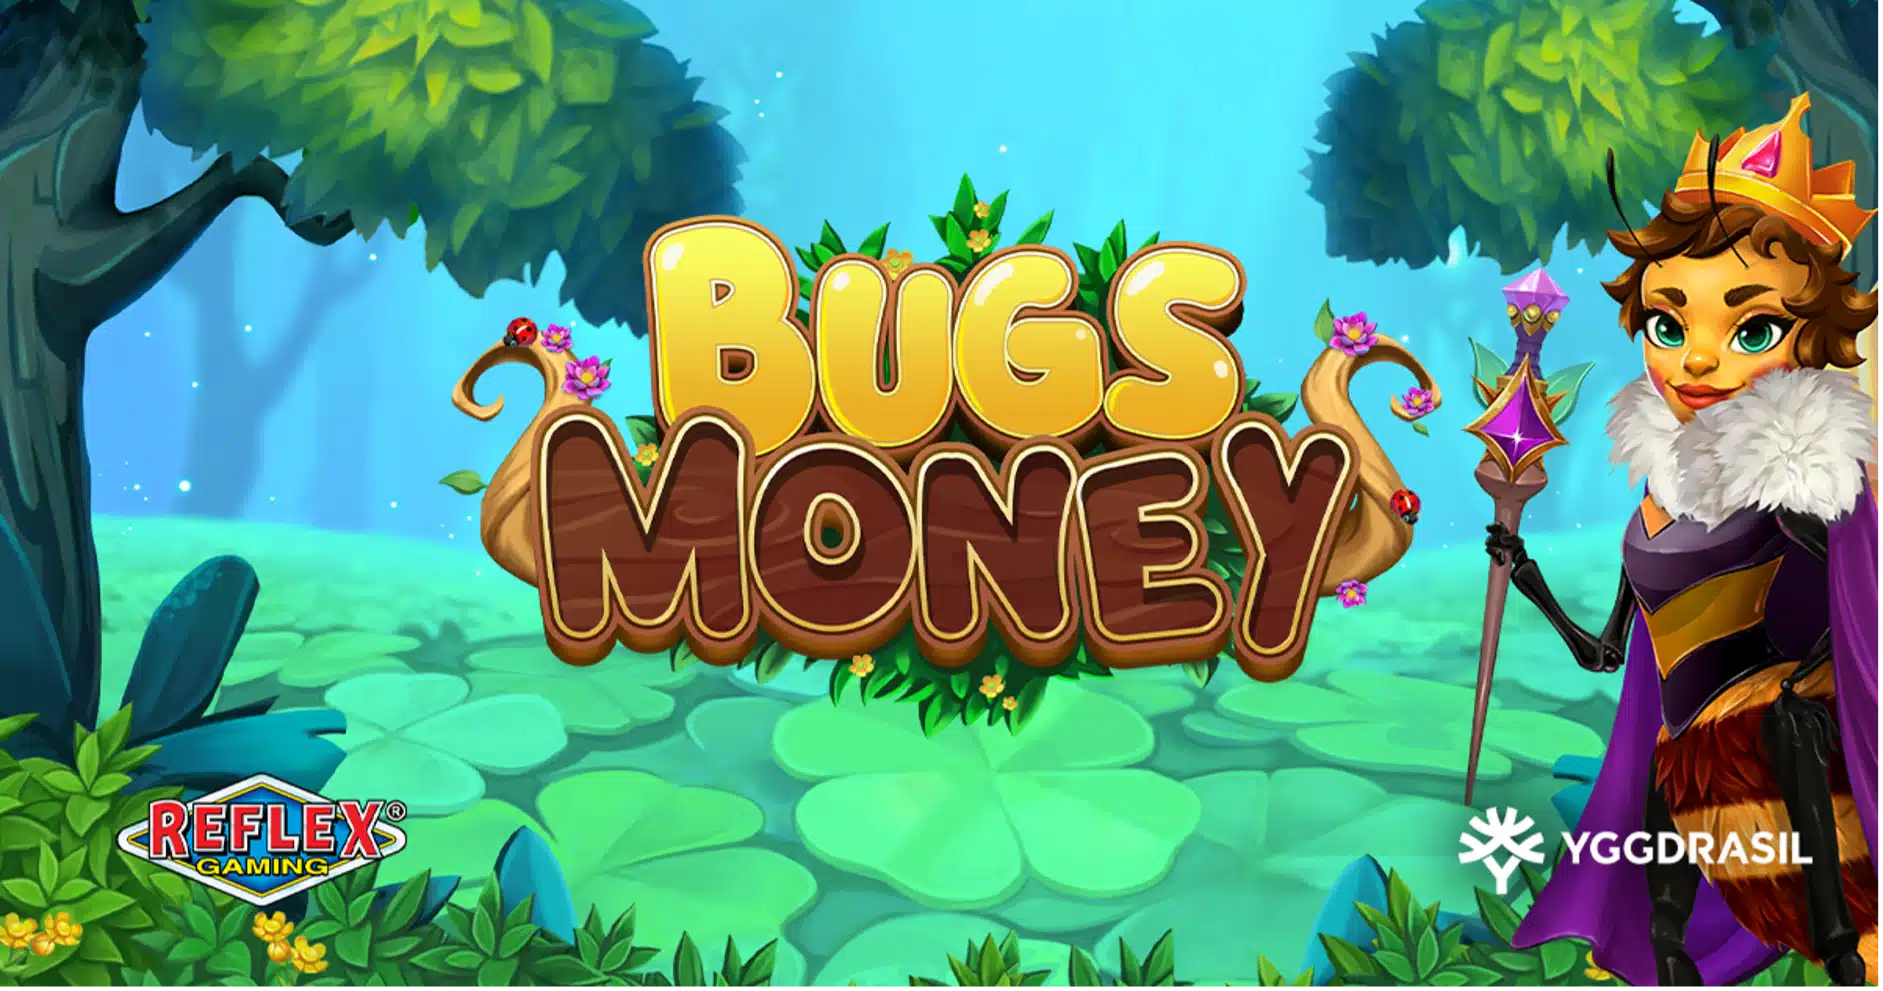 Yggdrasil and Reflex Gaming Release New Slot Bugs Money